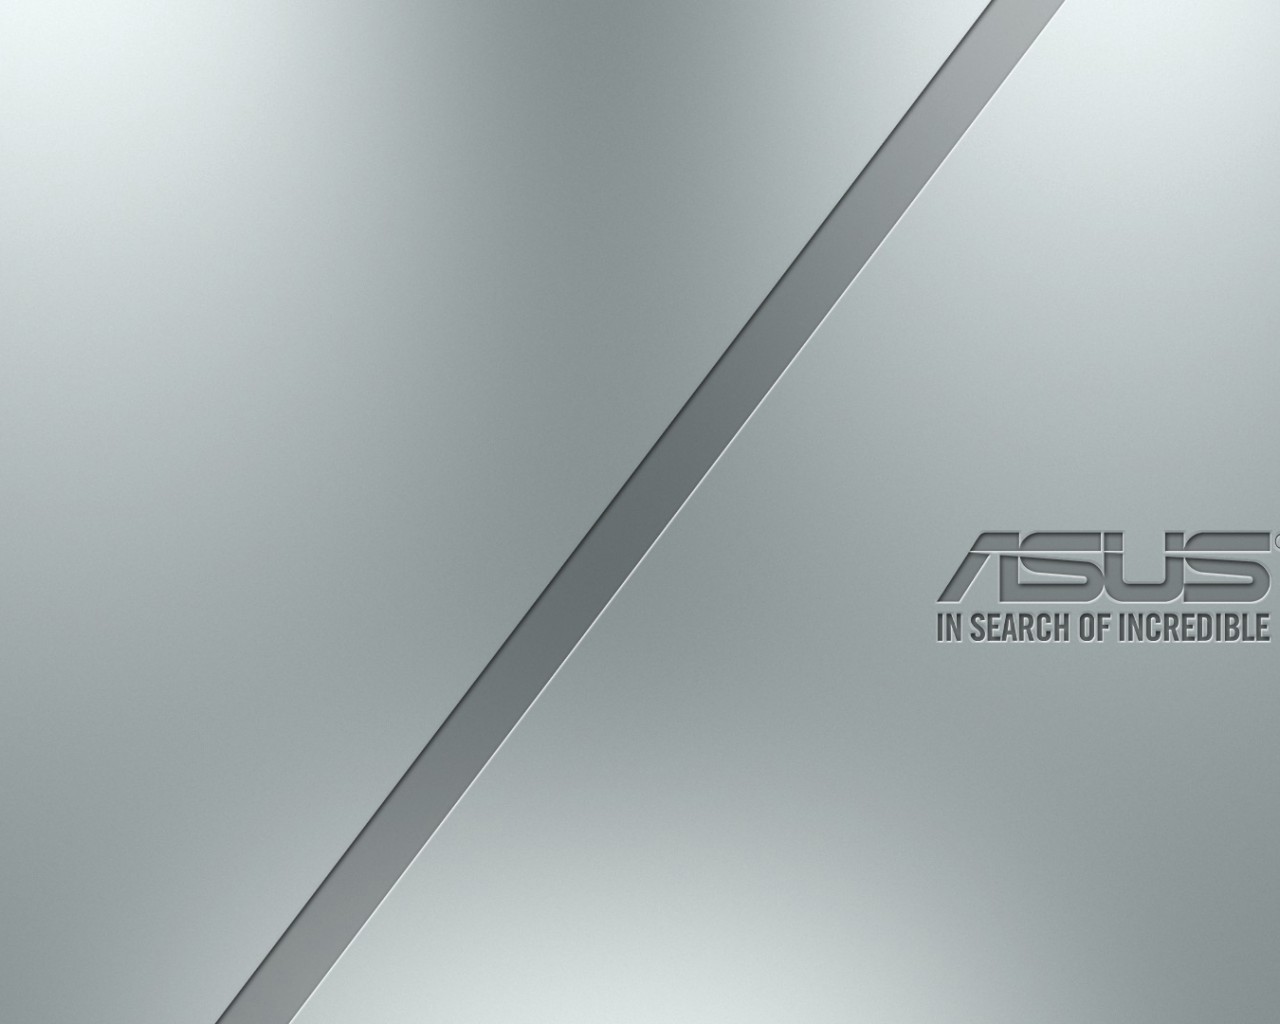 Asus, Technology Brand, In Search Of Incredible, Silver